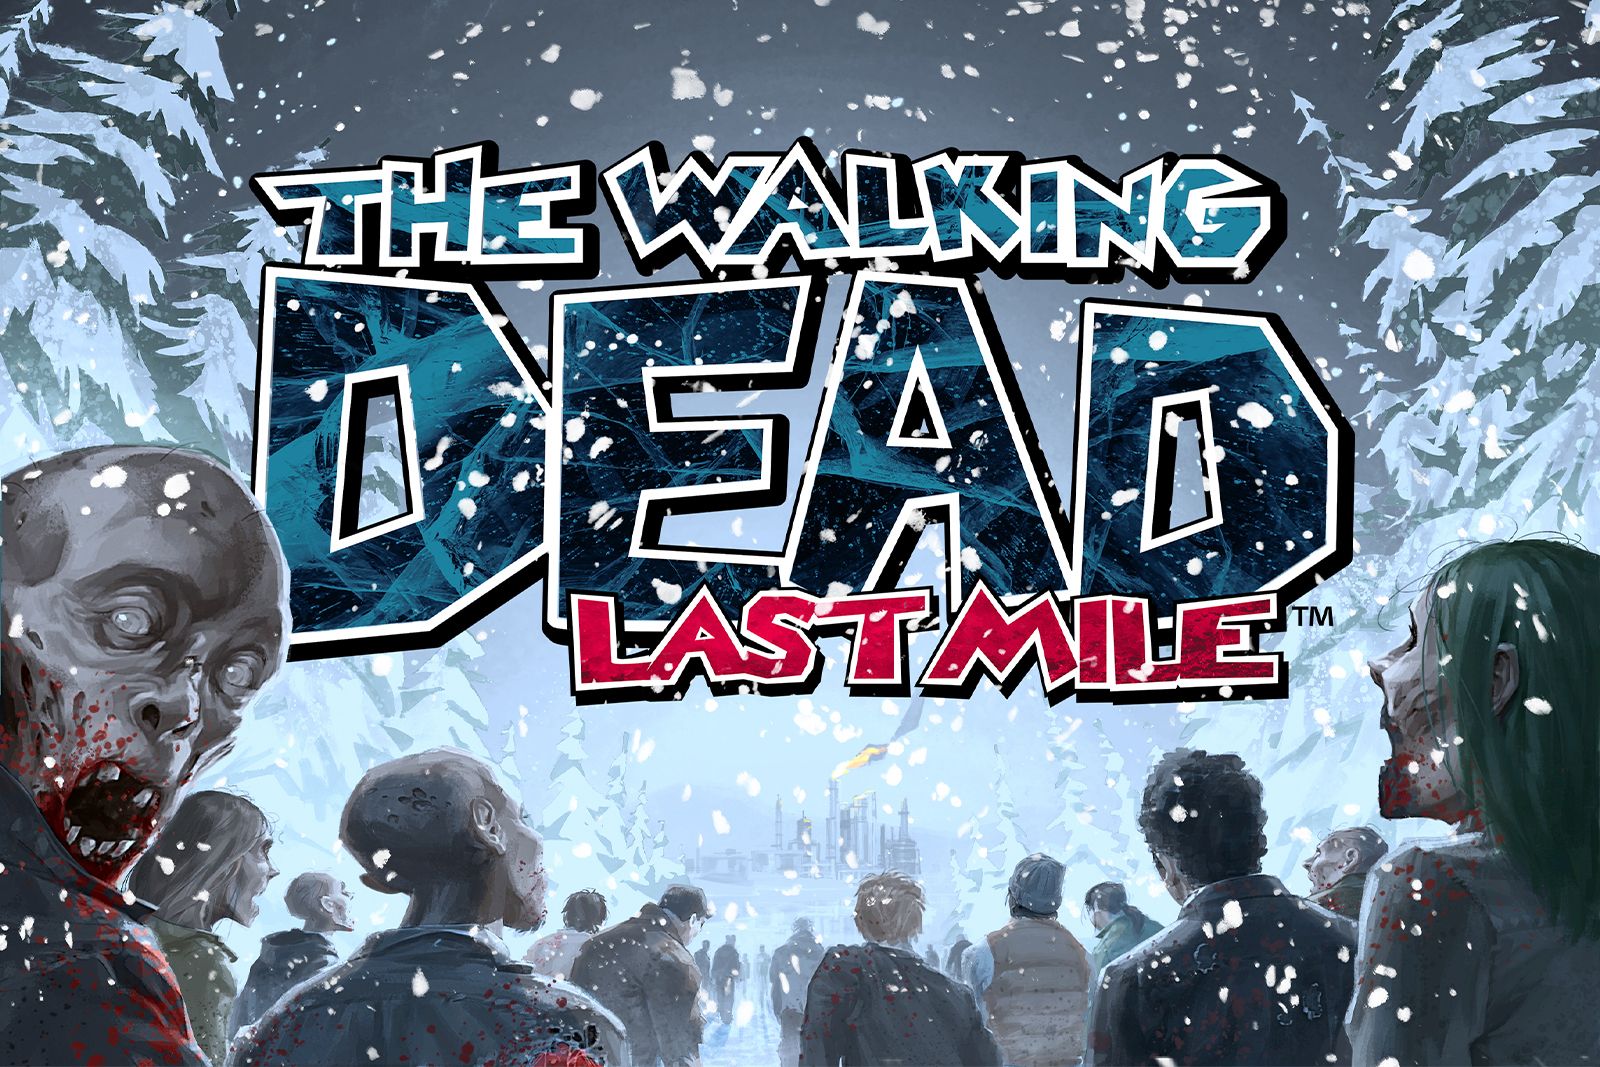 The Walking Dead Last Mile is an interactive live game coming to Facebook